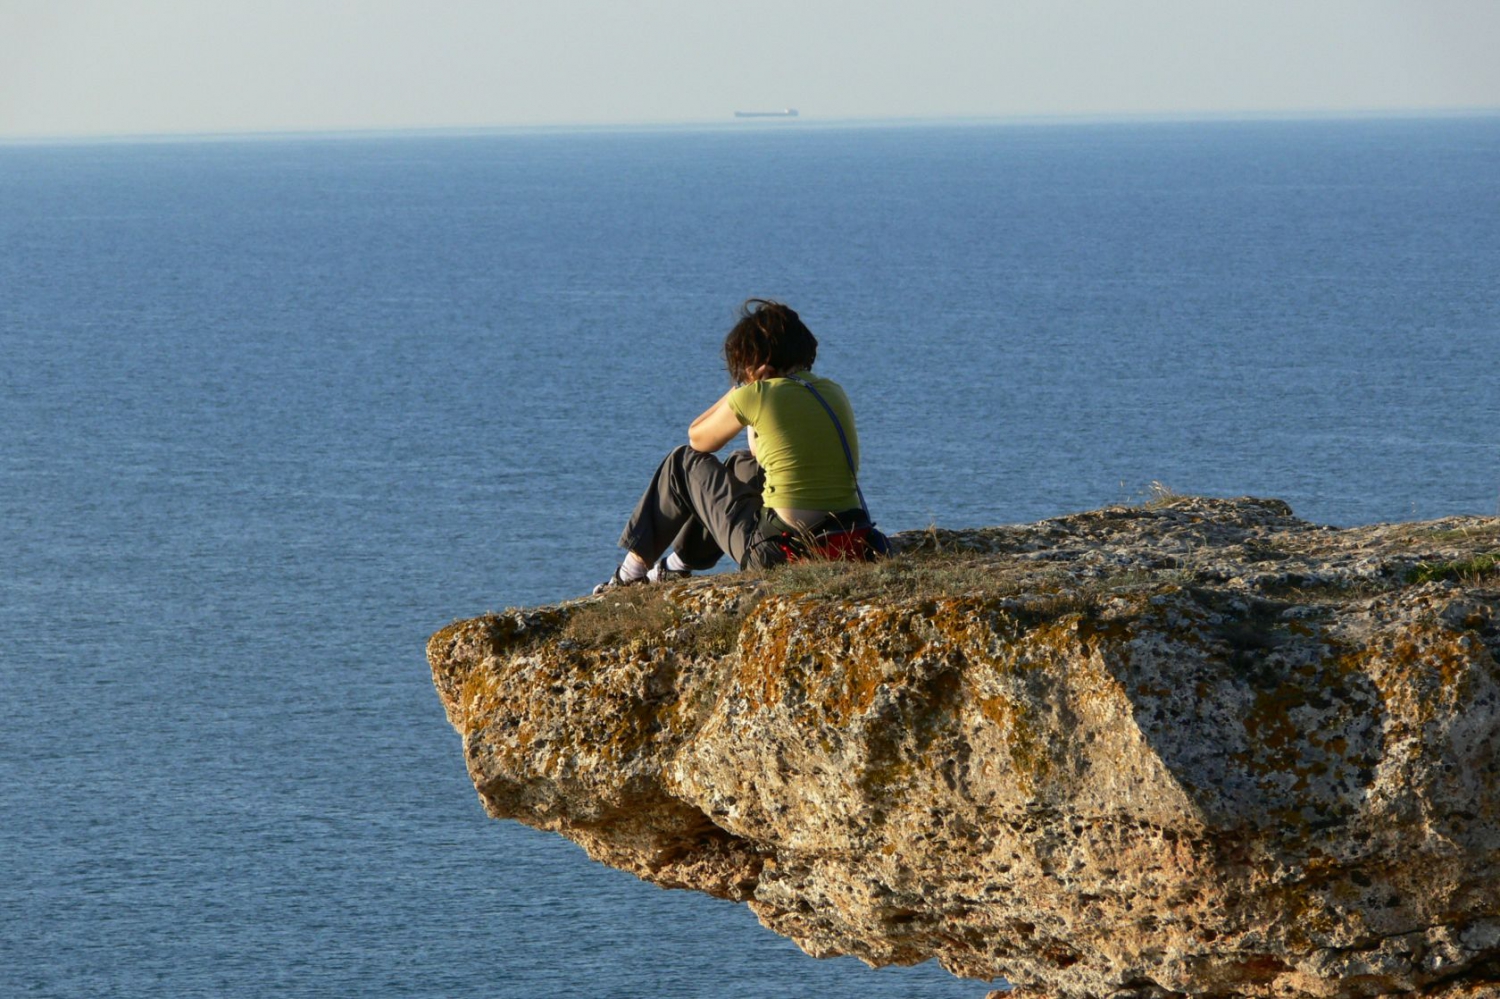 A girl enjoys the sea view from the cliffs